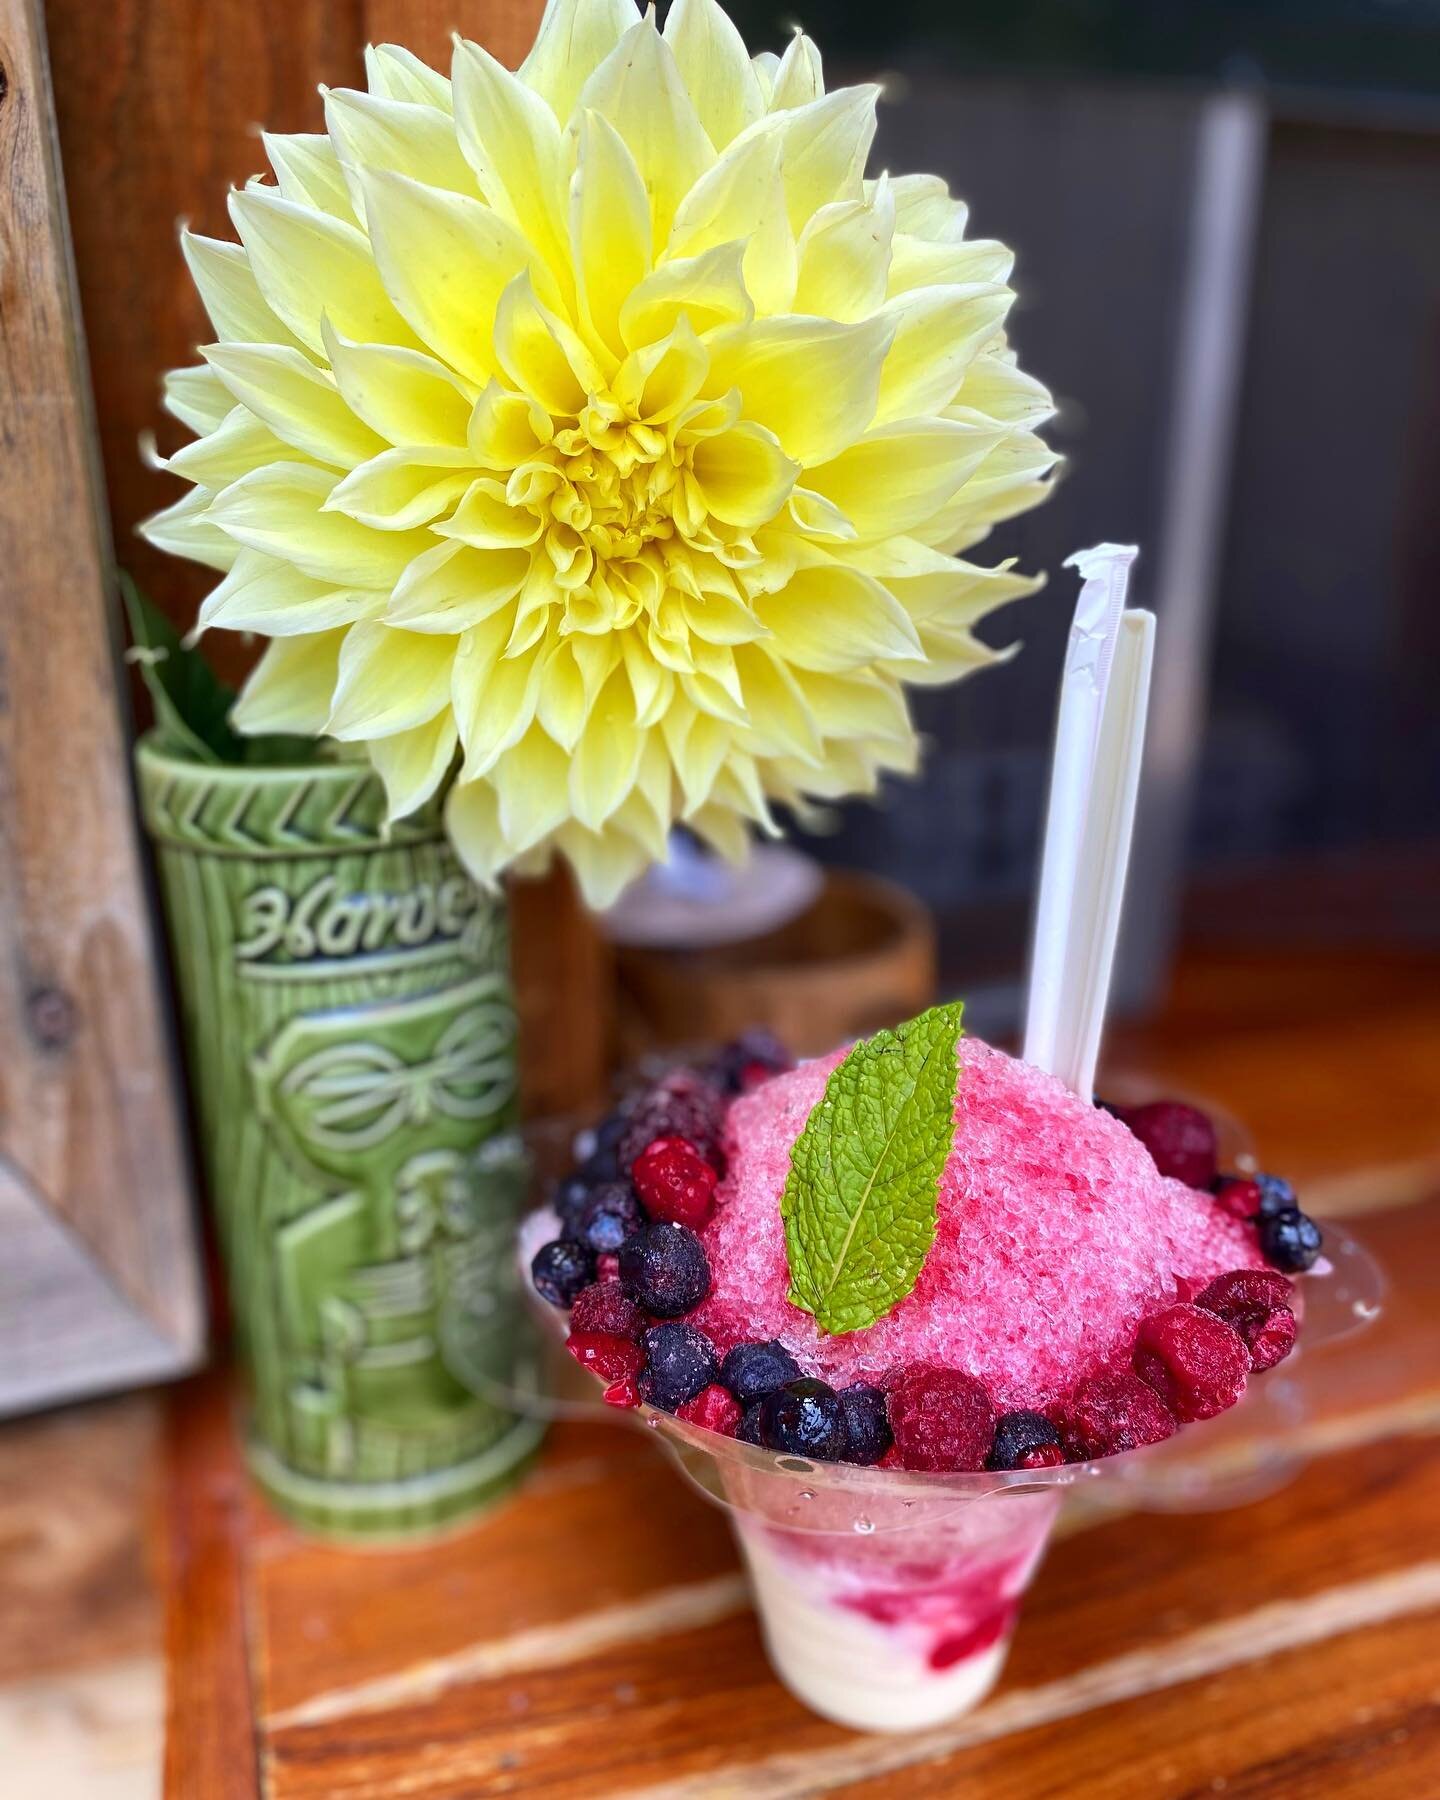 ADRIFT SHAVE ICE IS OPEN! 
Come and cool off with a tasty Hawaiian Style Shave Ice🍧 #adrifttahoe #shaveice🍧